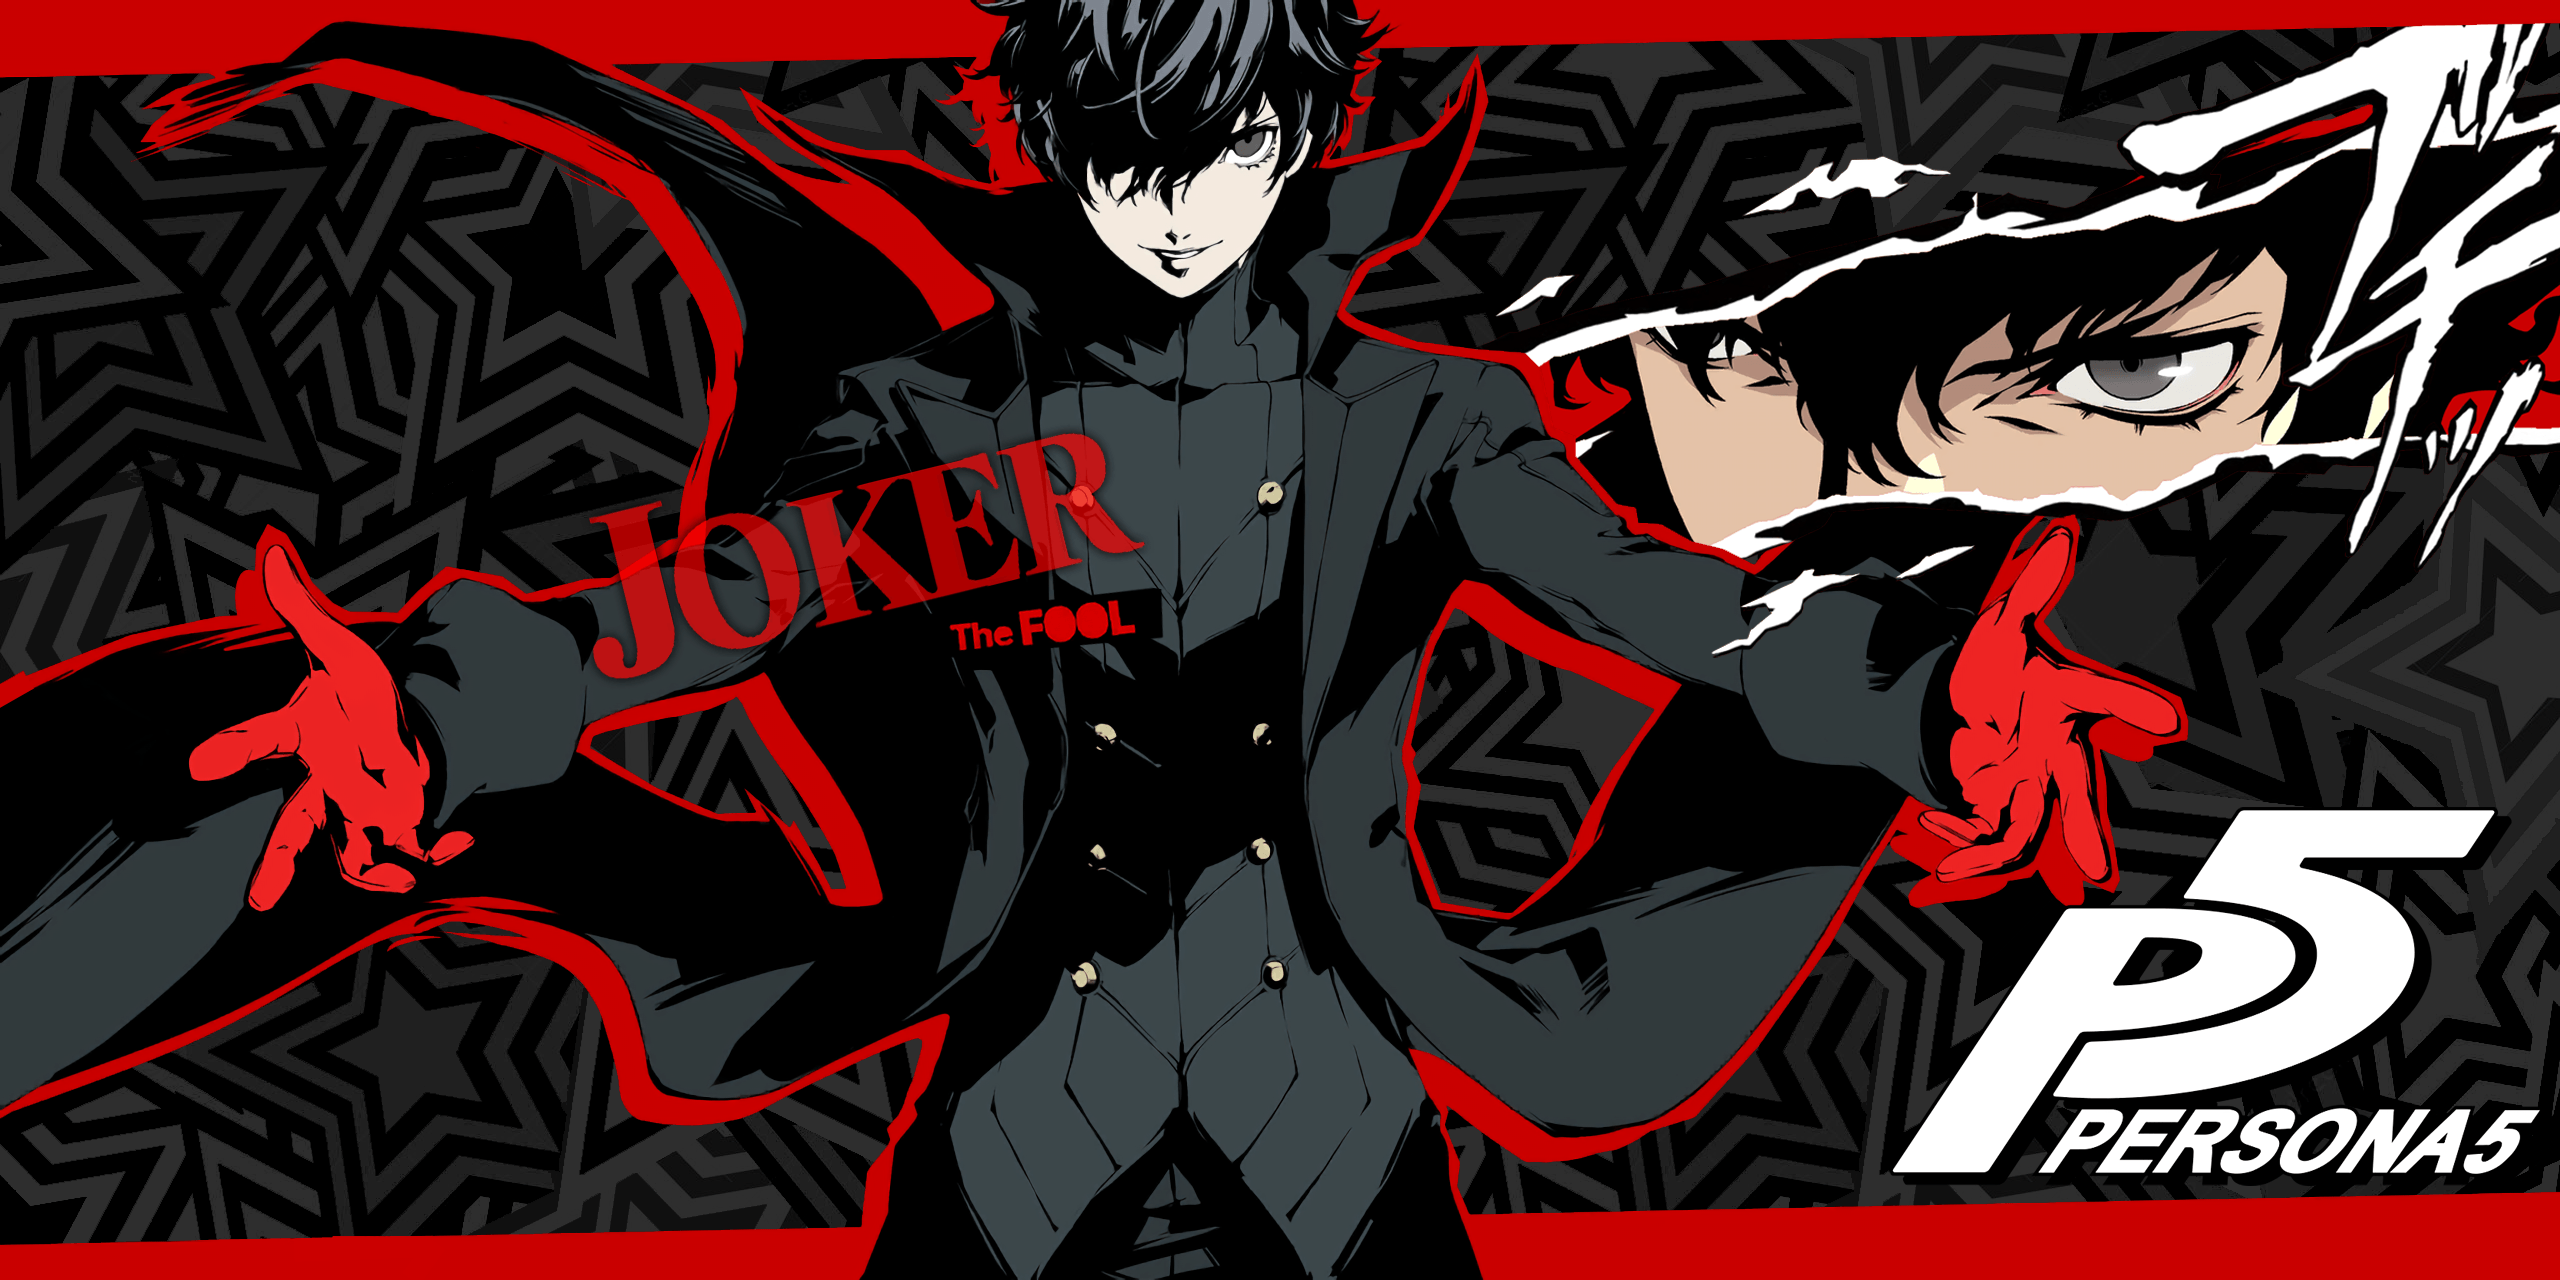 I made some Persona 5 Wallpaper